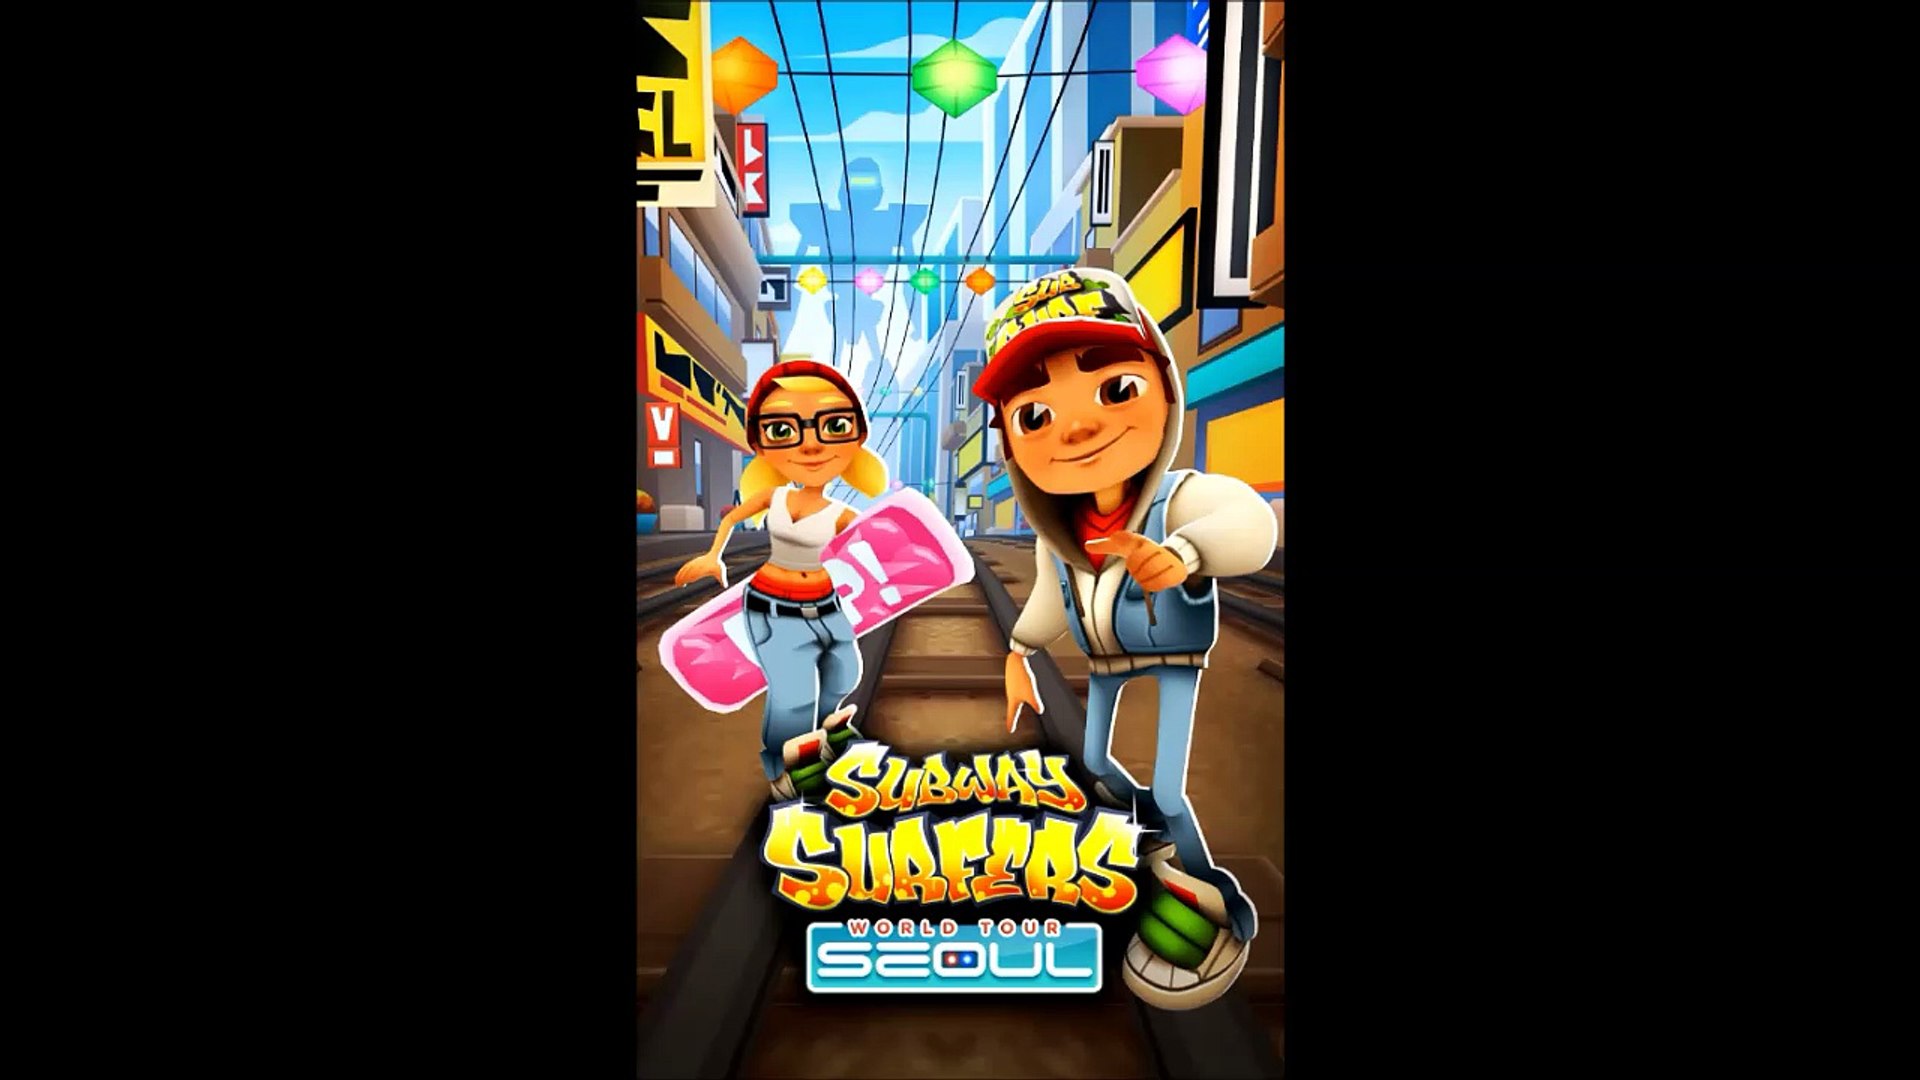 Subway surfers - Unlock all characters cheat on android - video Dailymotion